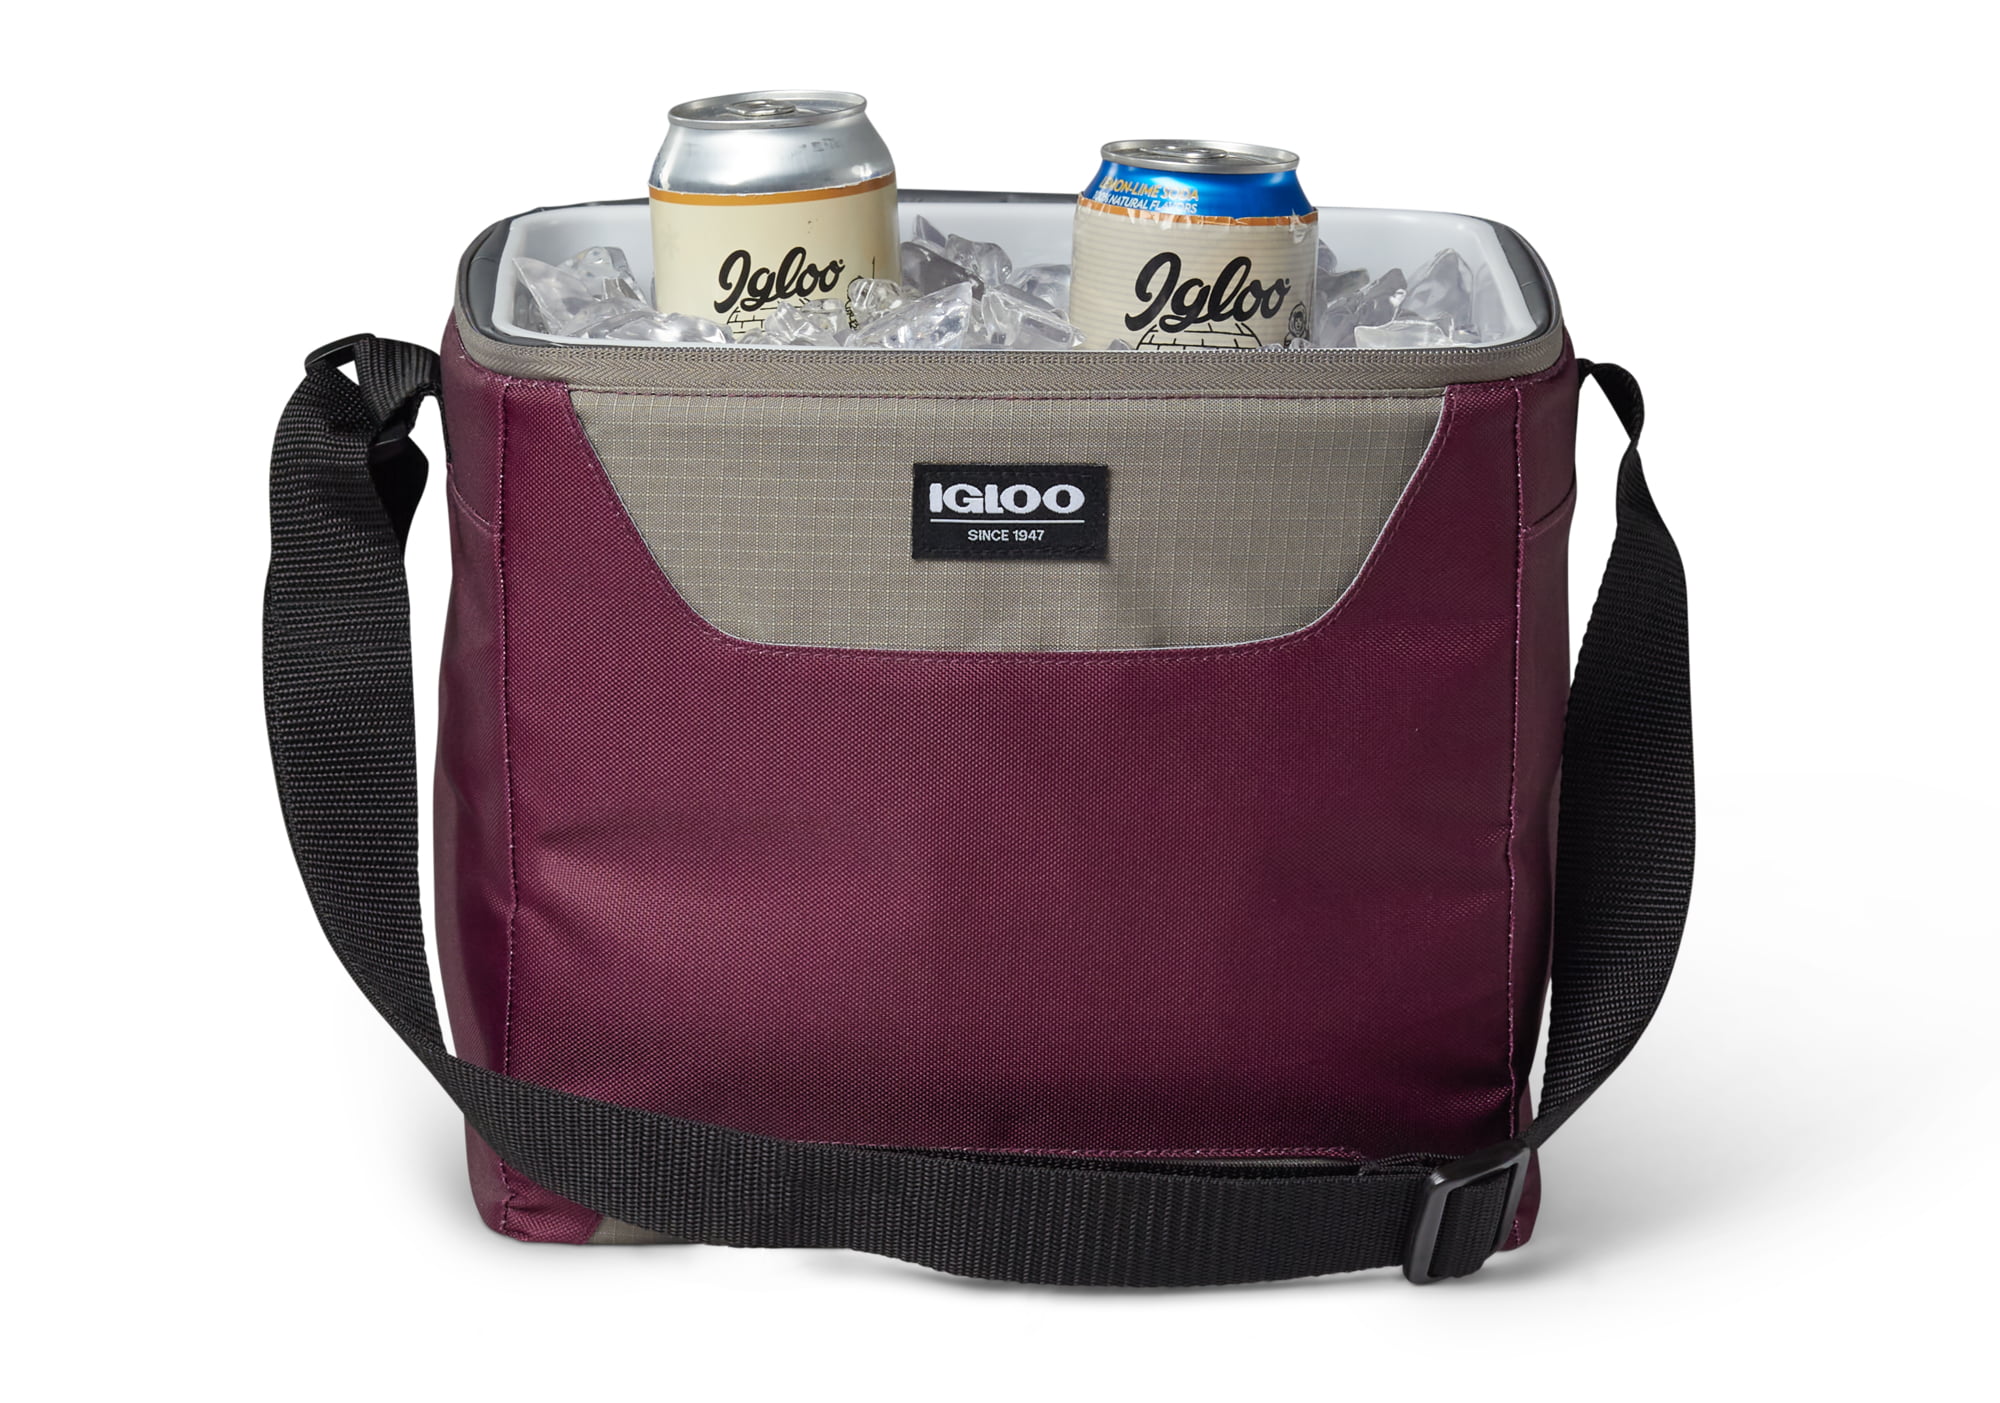 Igloo 100104 - Legacy Lunch Pack Cooler